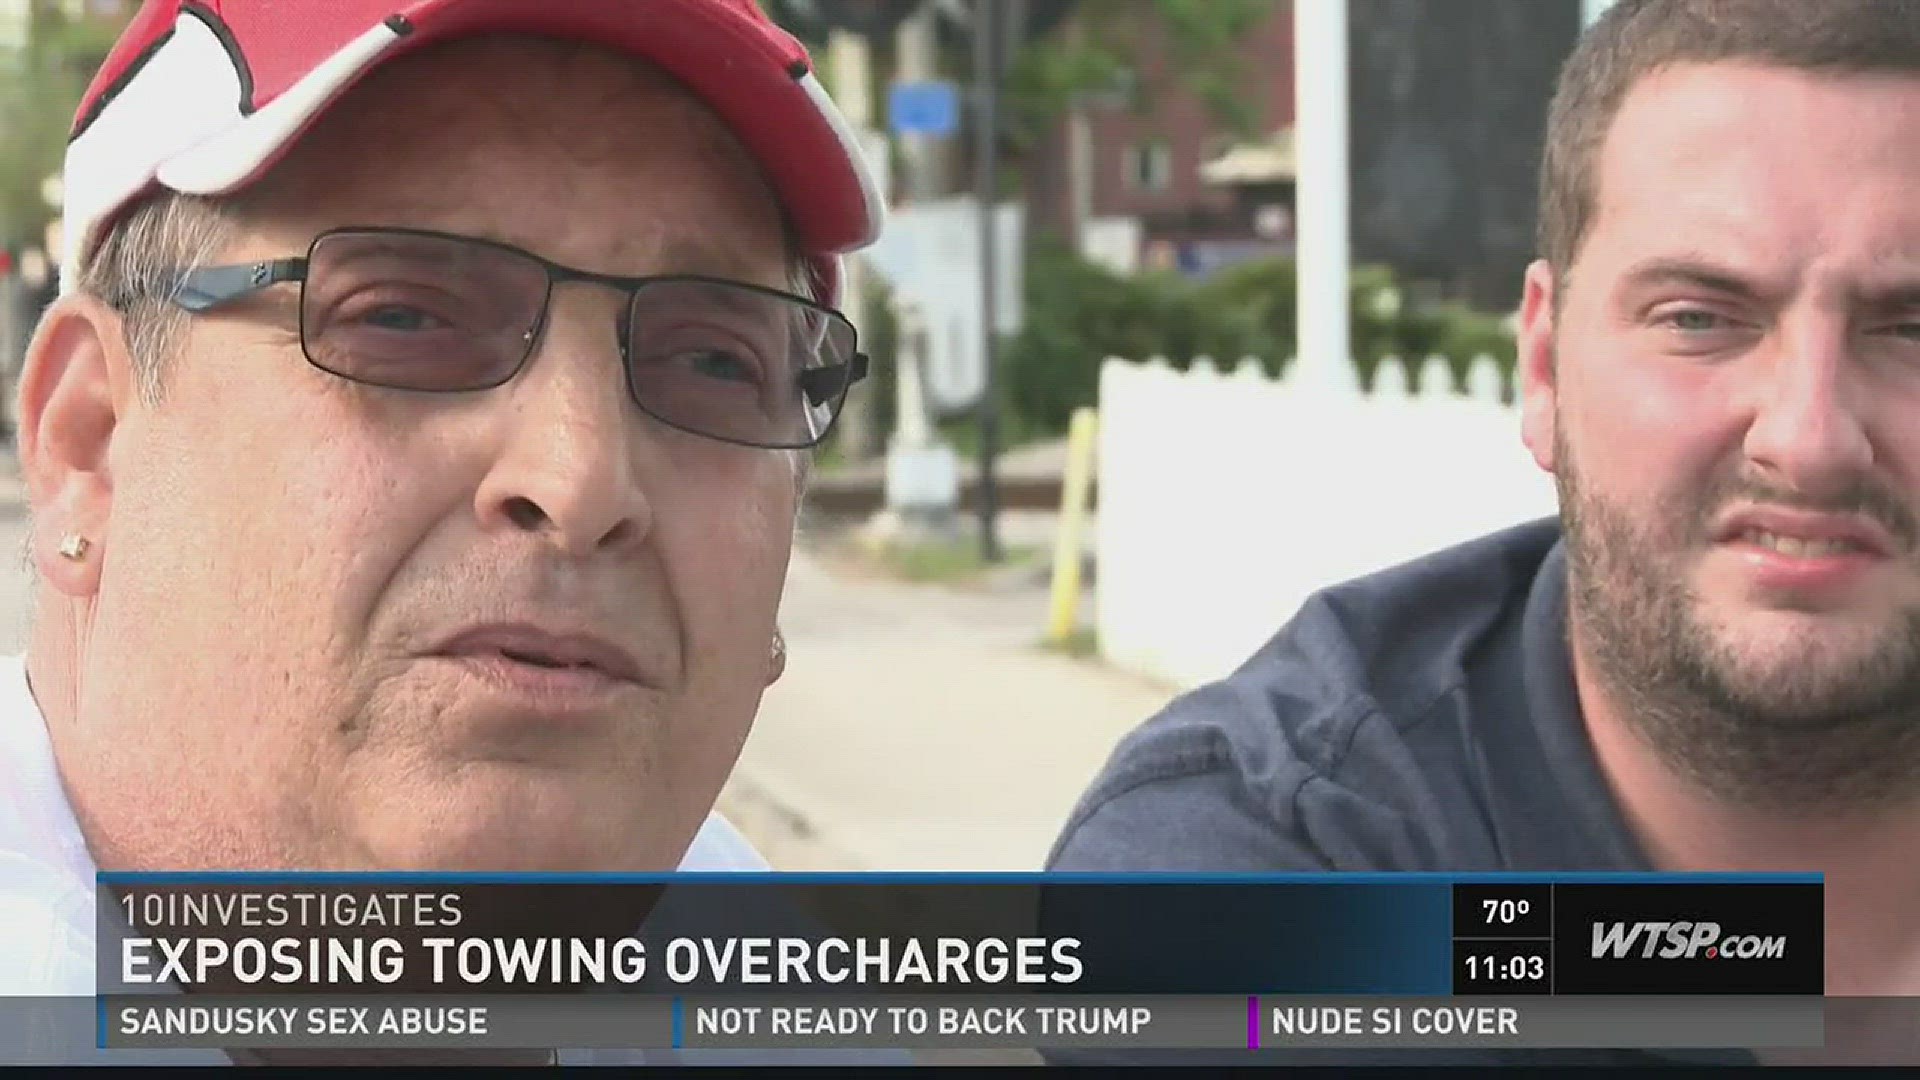 10Investigates confronts a towing company that is overcharging for removing vehicles.